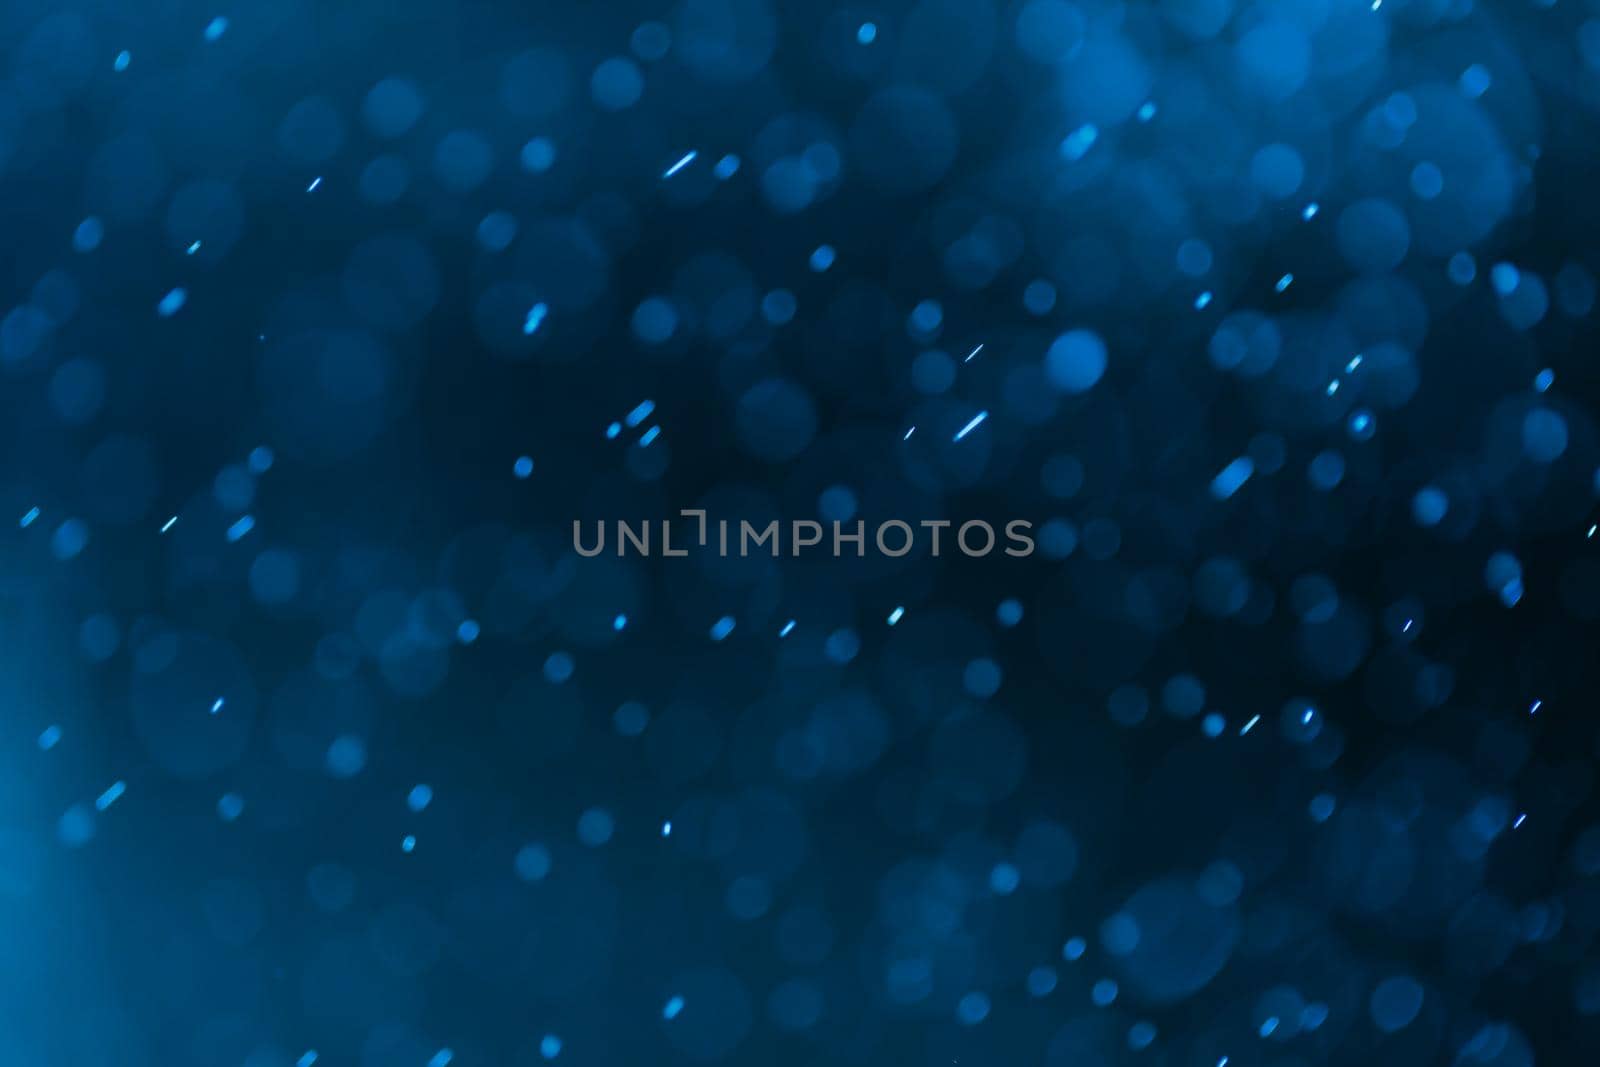 Bokeh blurred light  by Wasant